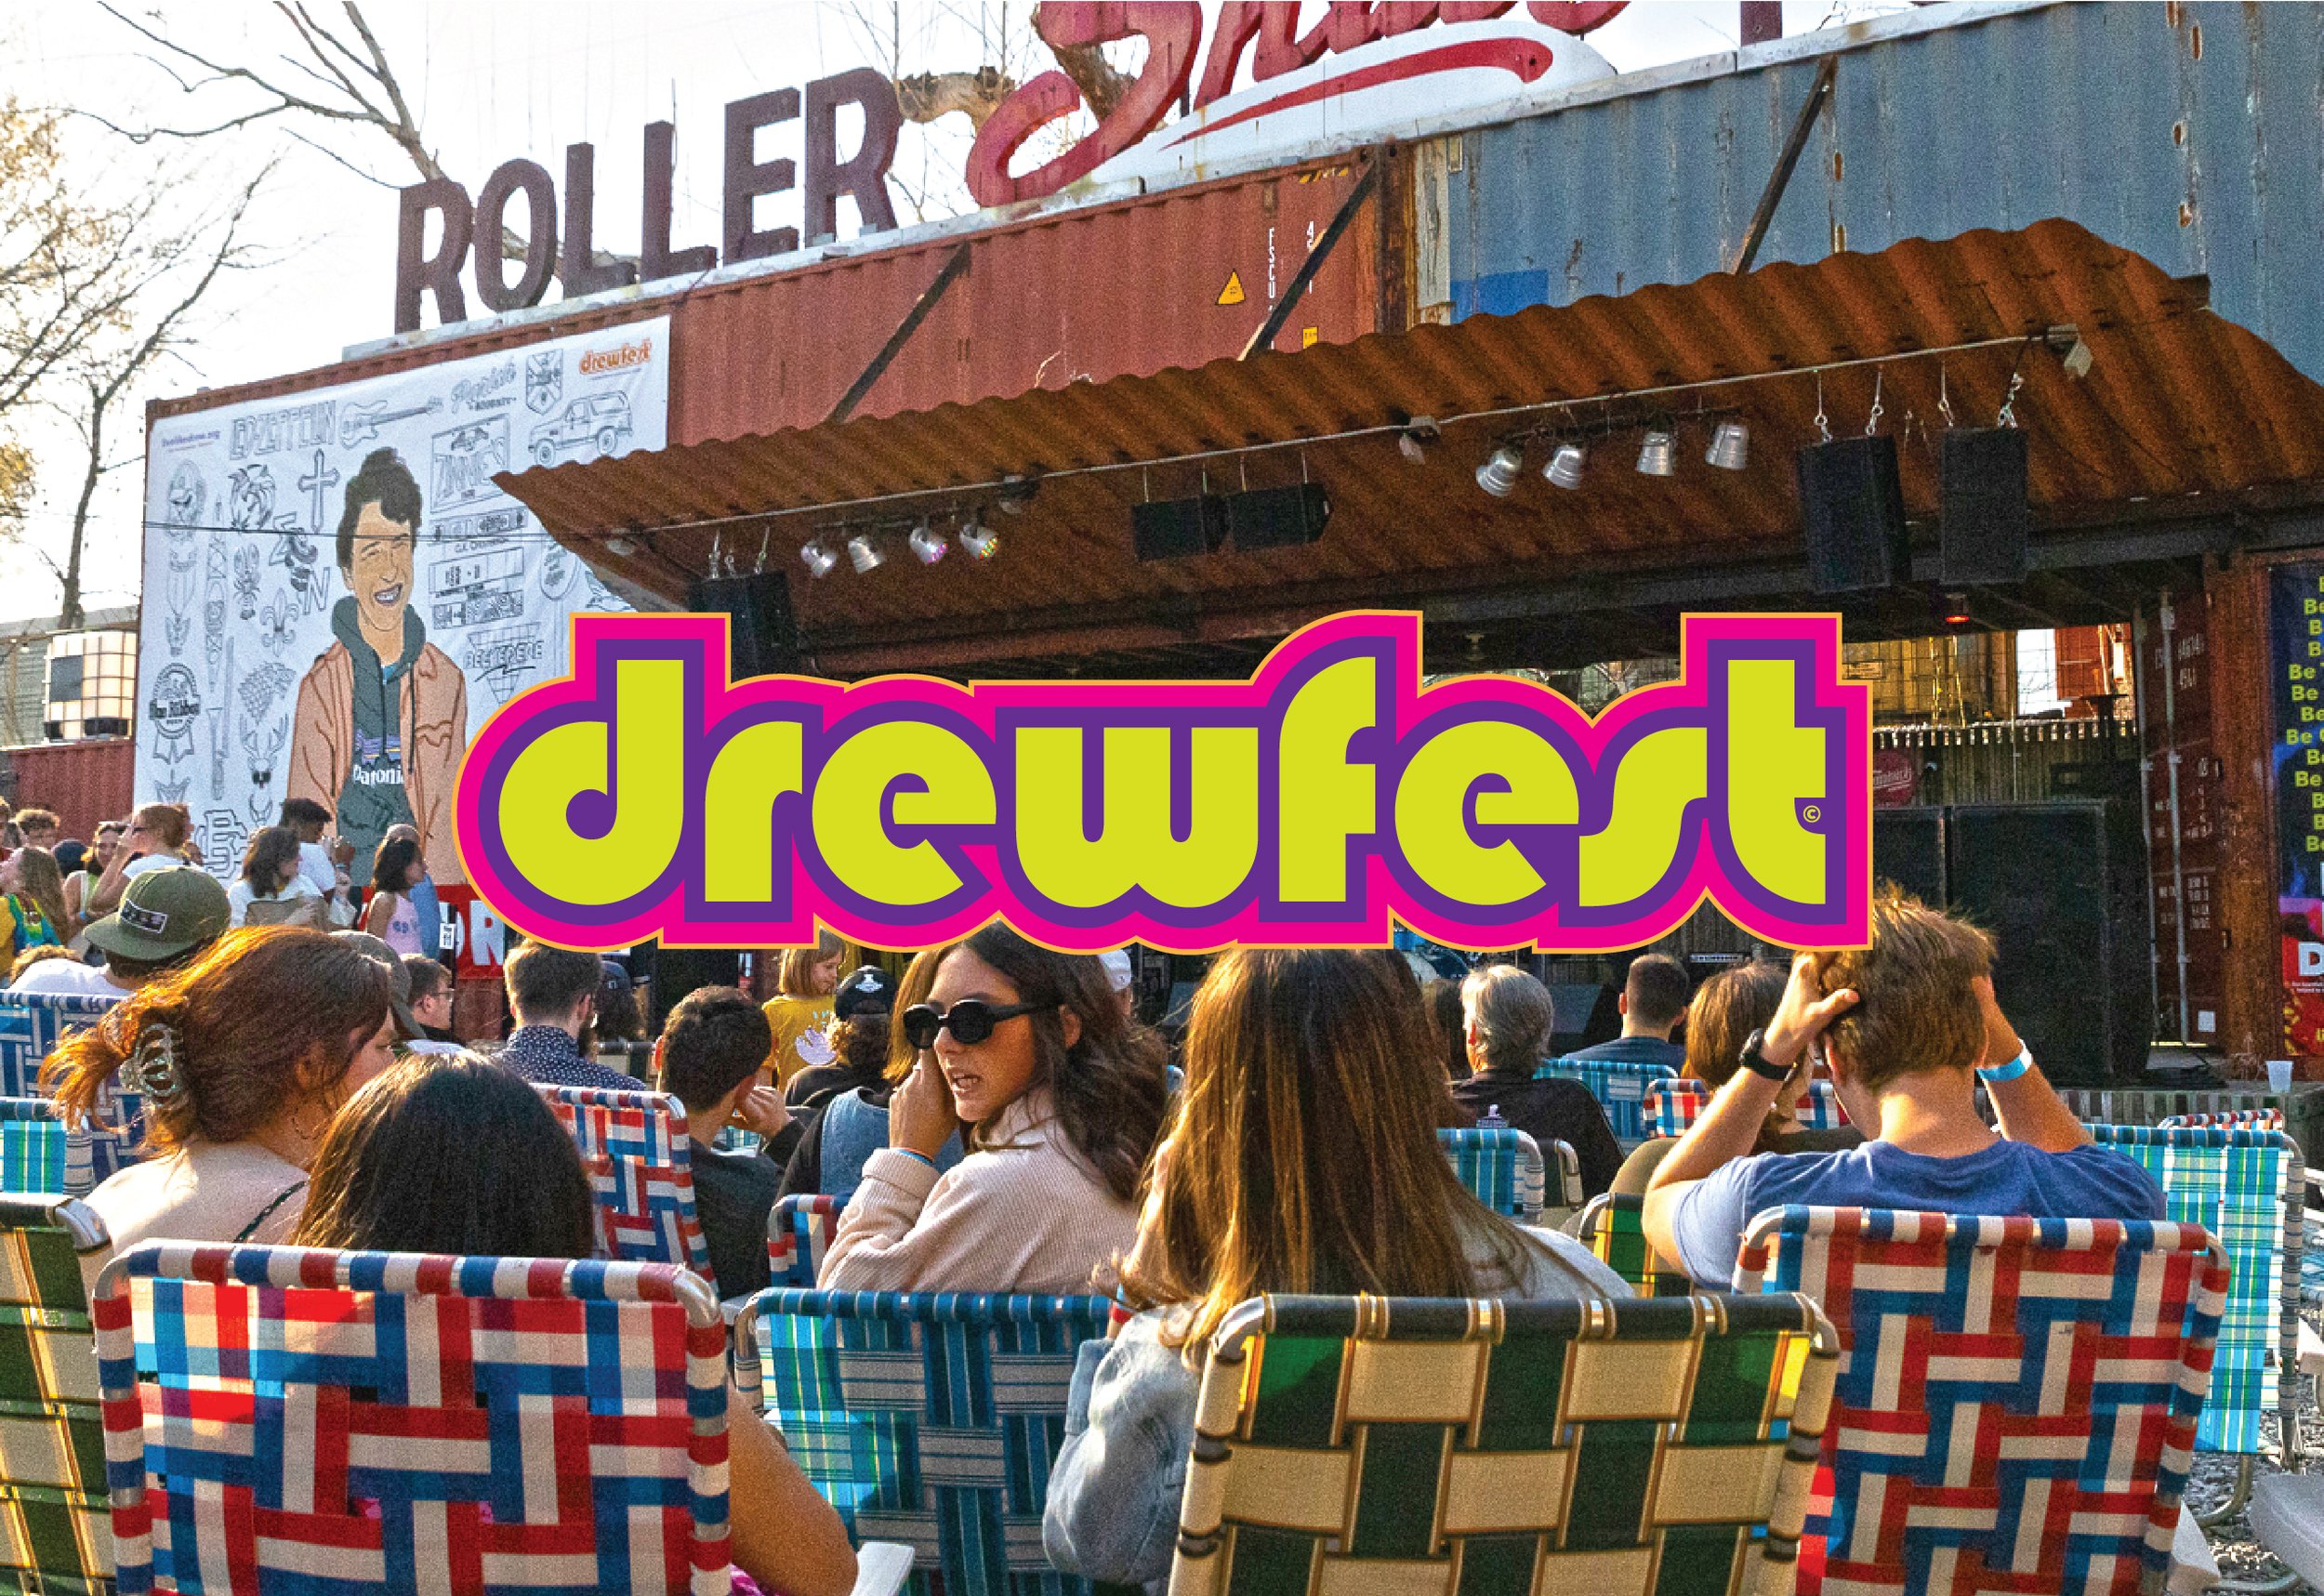  DrewFest Memphis  Railgarten  Branding creative and design by Chuck Mitchell  Pro bono project celebrating the life of Drew Rainer  Photograph by Bryant Cummings 